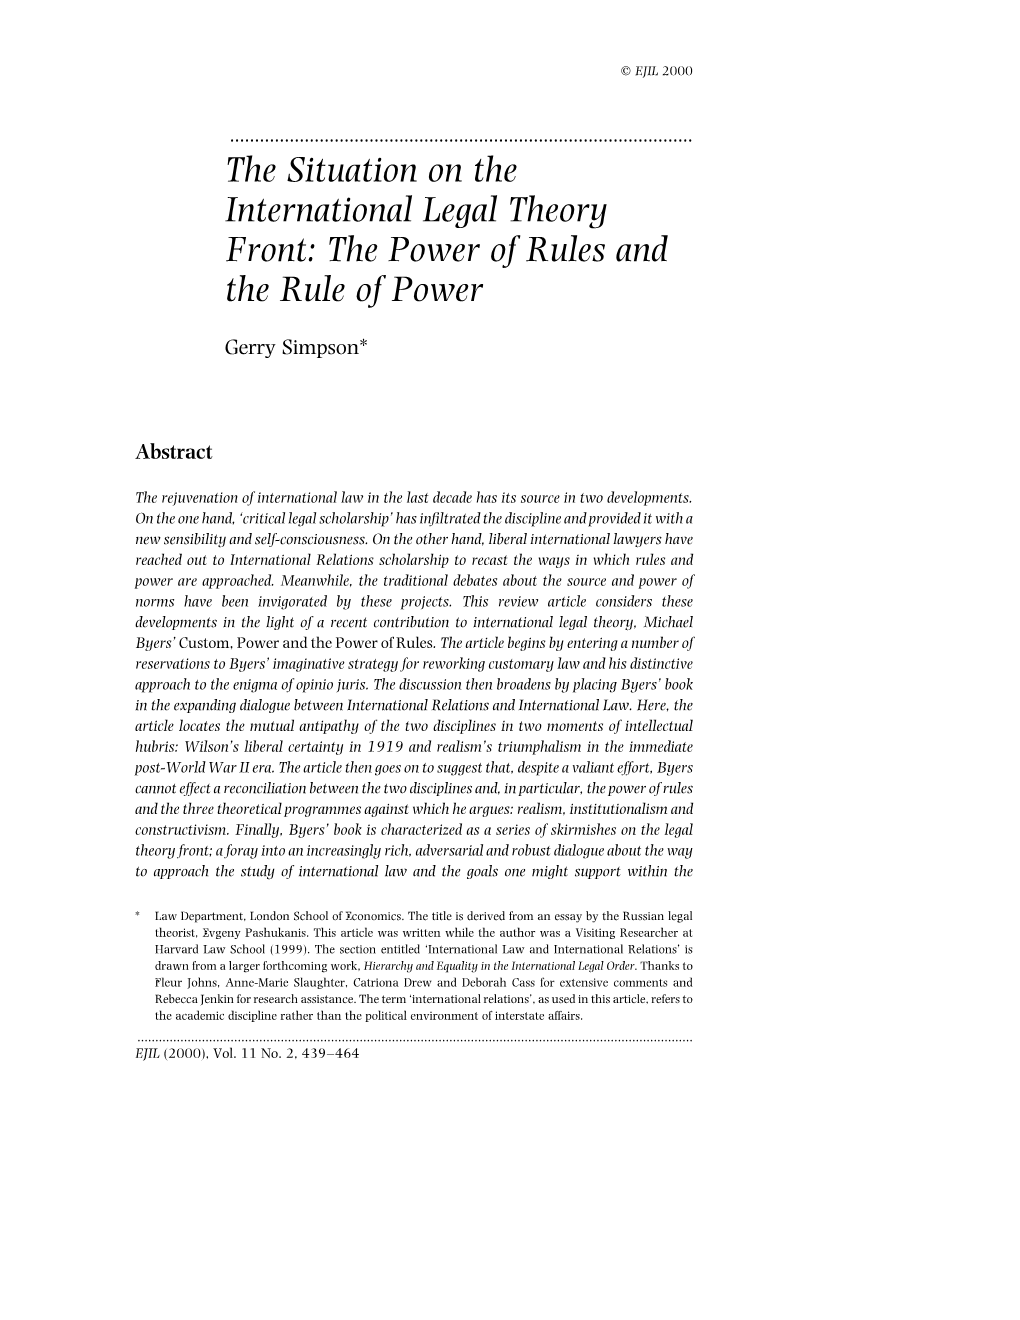 The Situation on the International Legal Theory Front: the Power of Rules and the Rule of Power